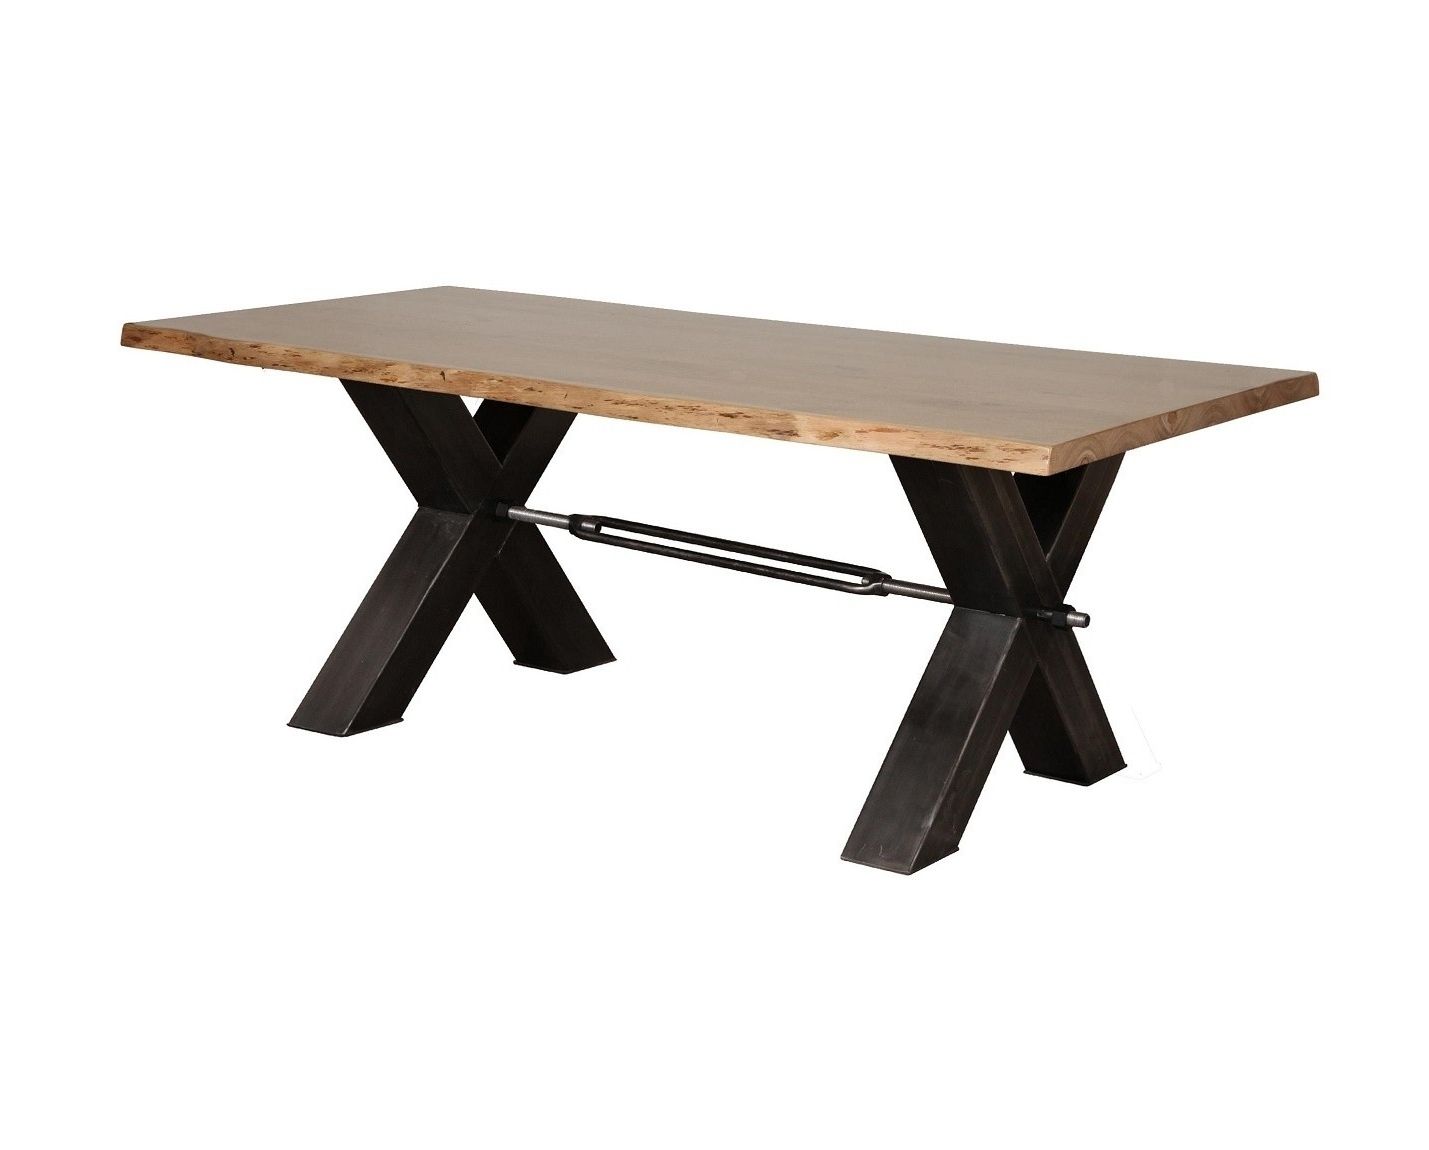 Widely Used Barkington Solid Oak Large Fixed Top Dining Table With Metal Legs Intended For Dining Tables With Metal Legs Wood Top (View 12 of 25)